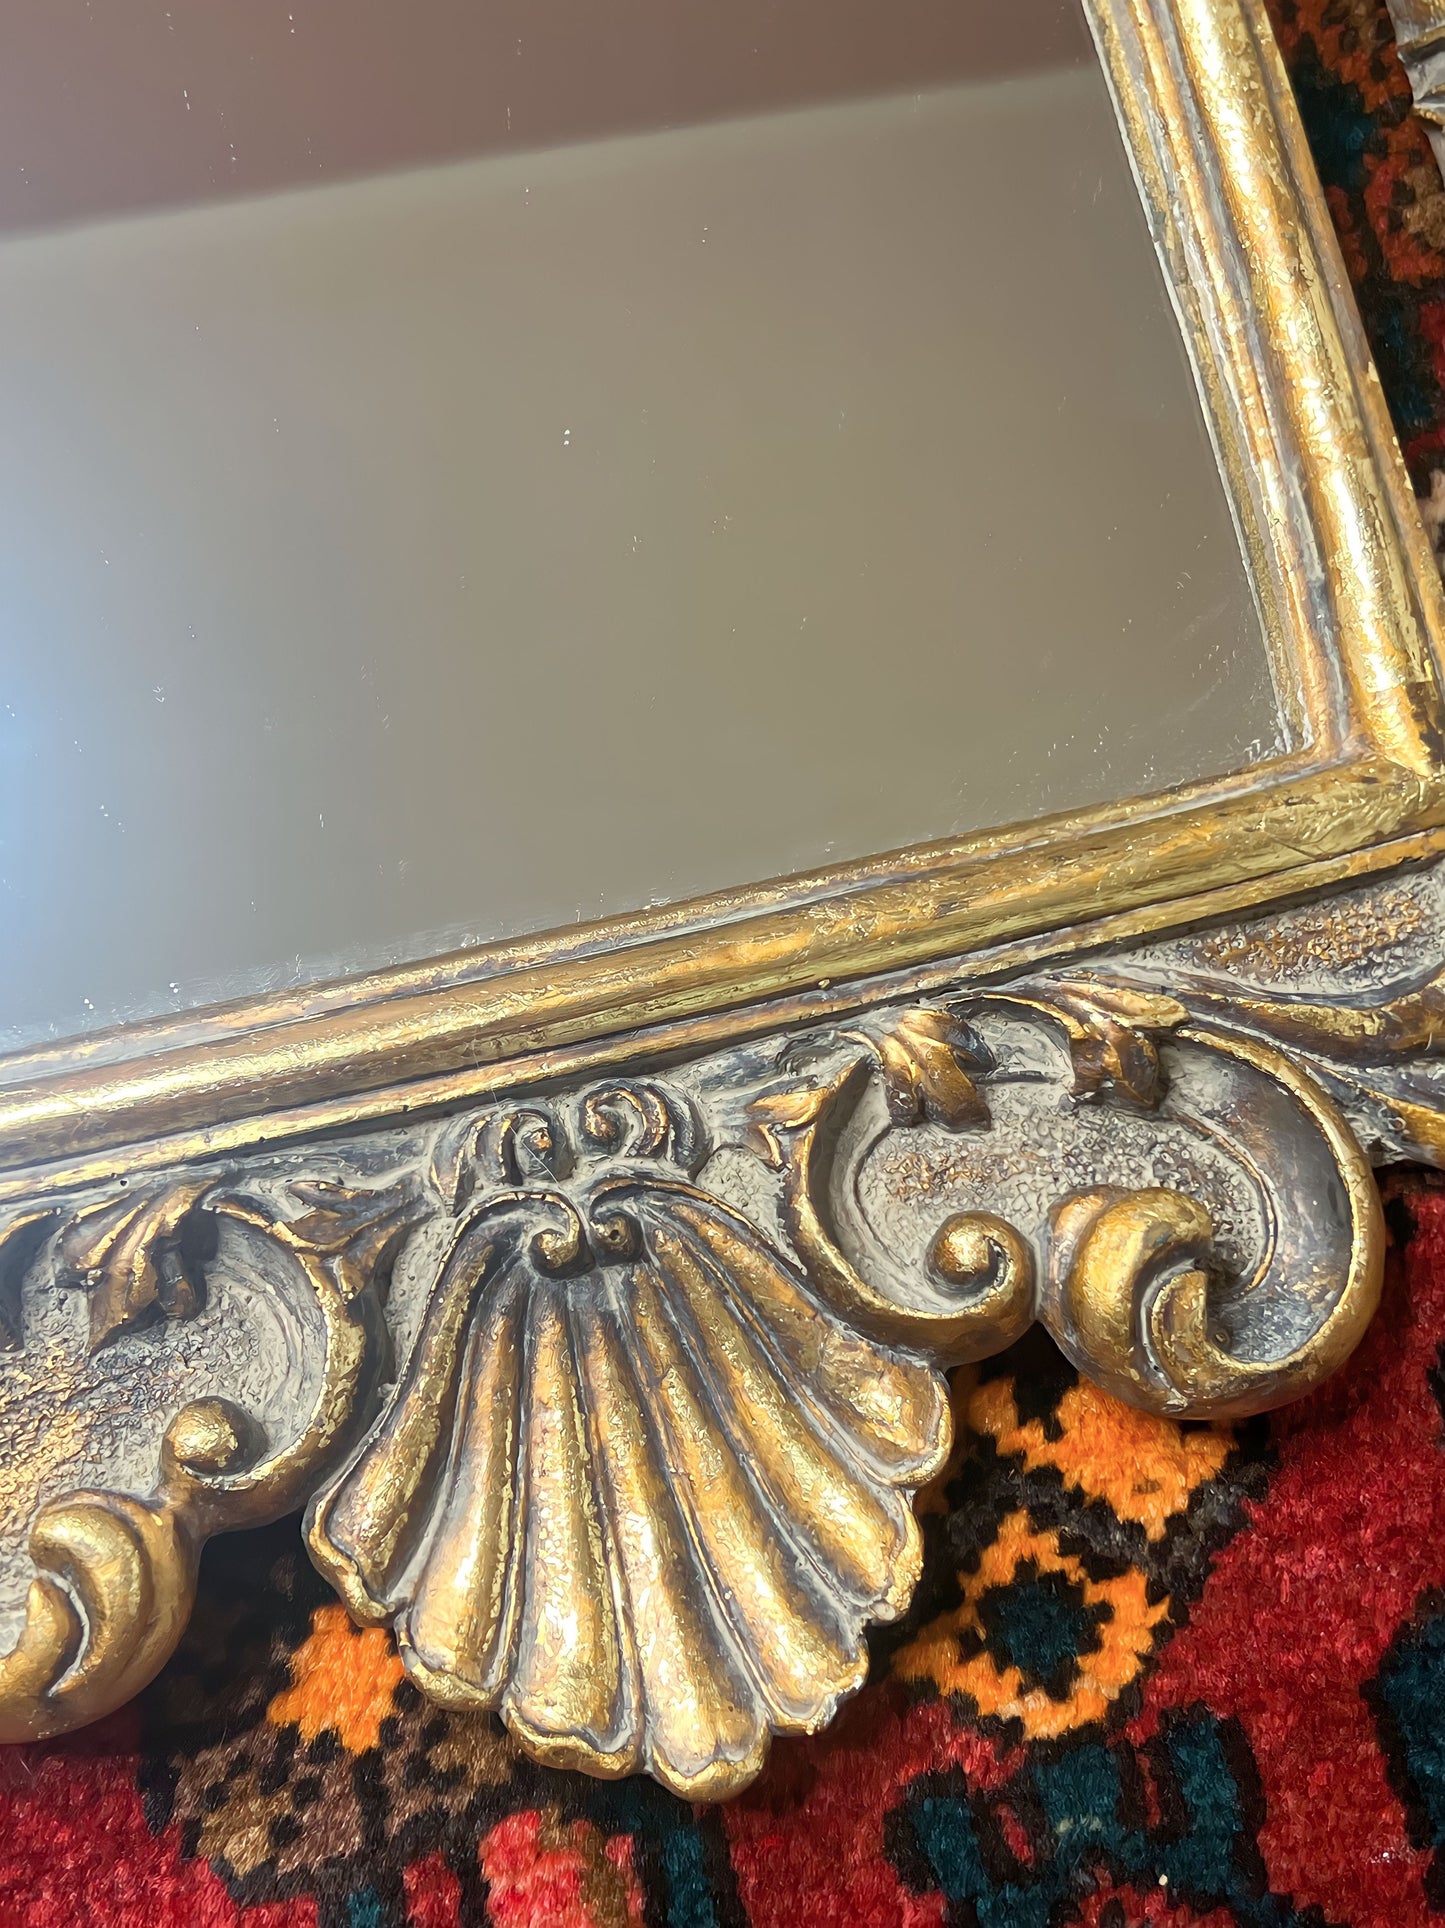 Beautiful Vintage Ornate Gold Mirror, 26” high by 17” - Excellent!